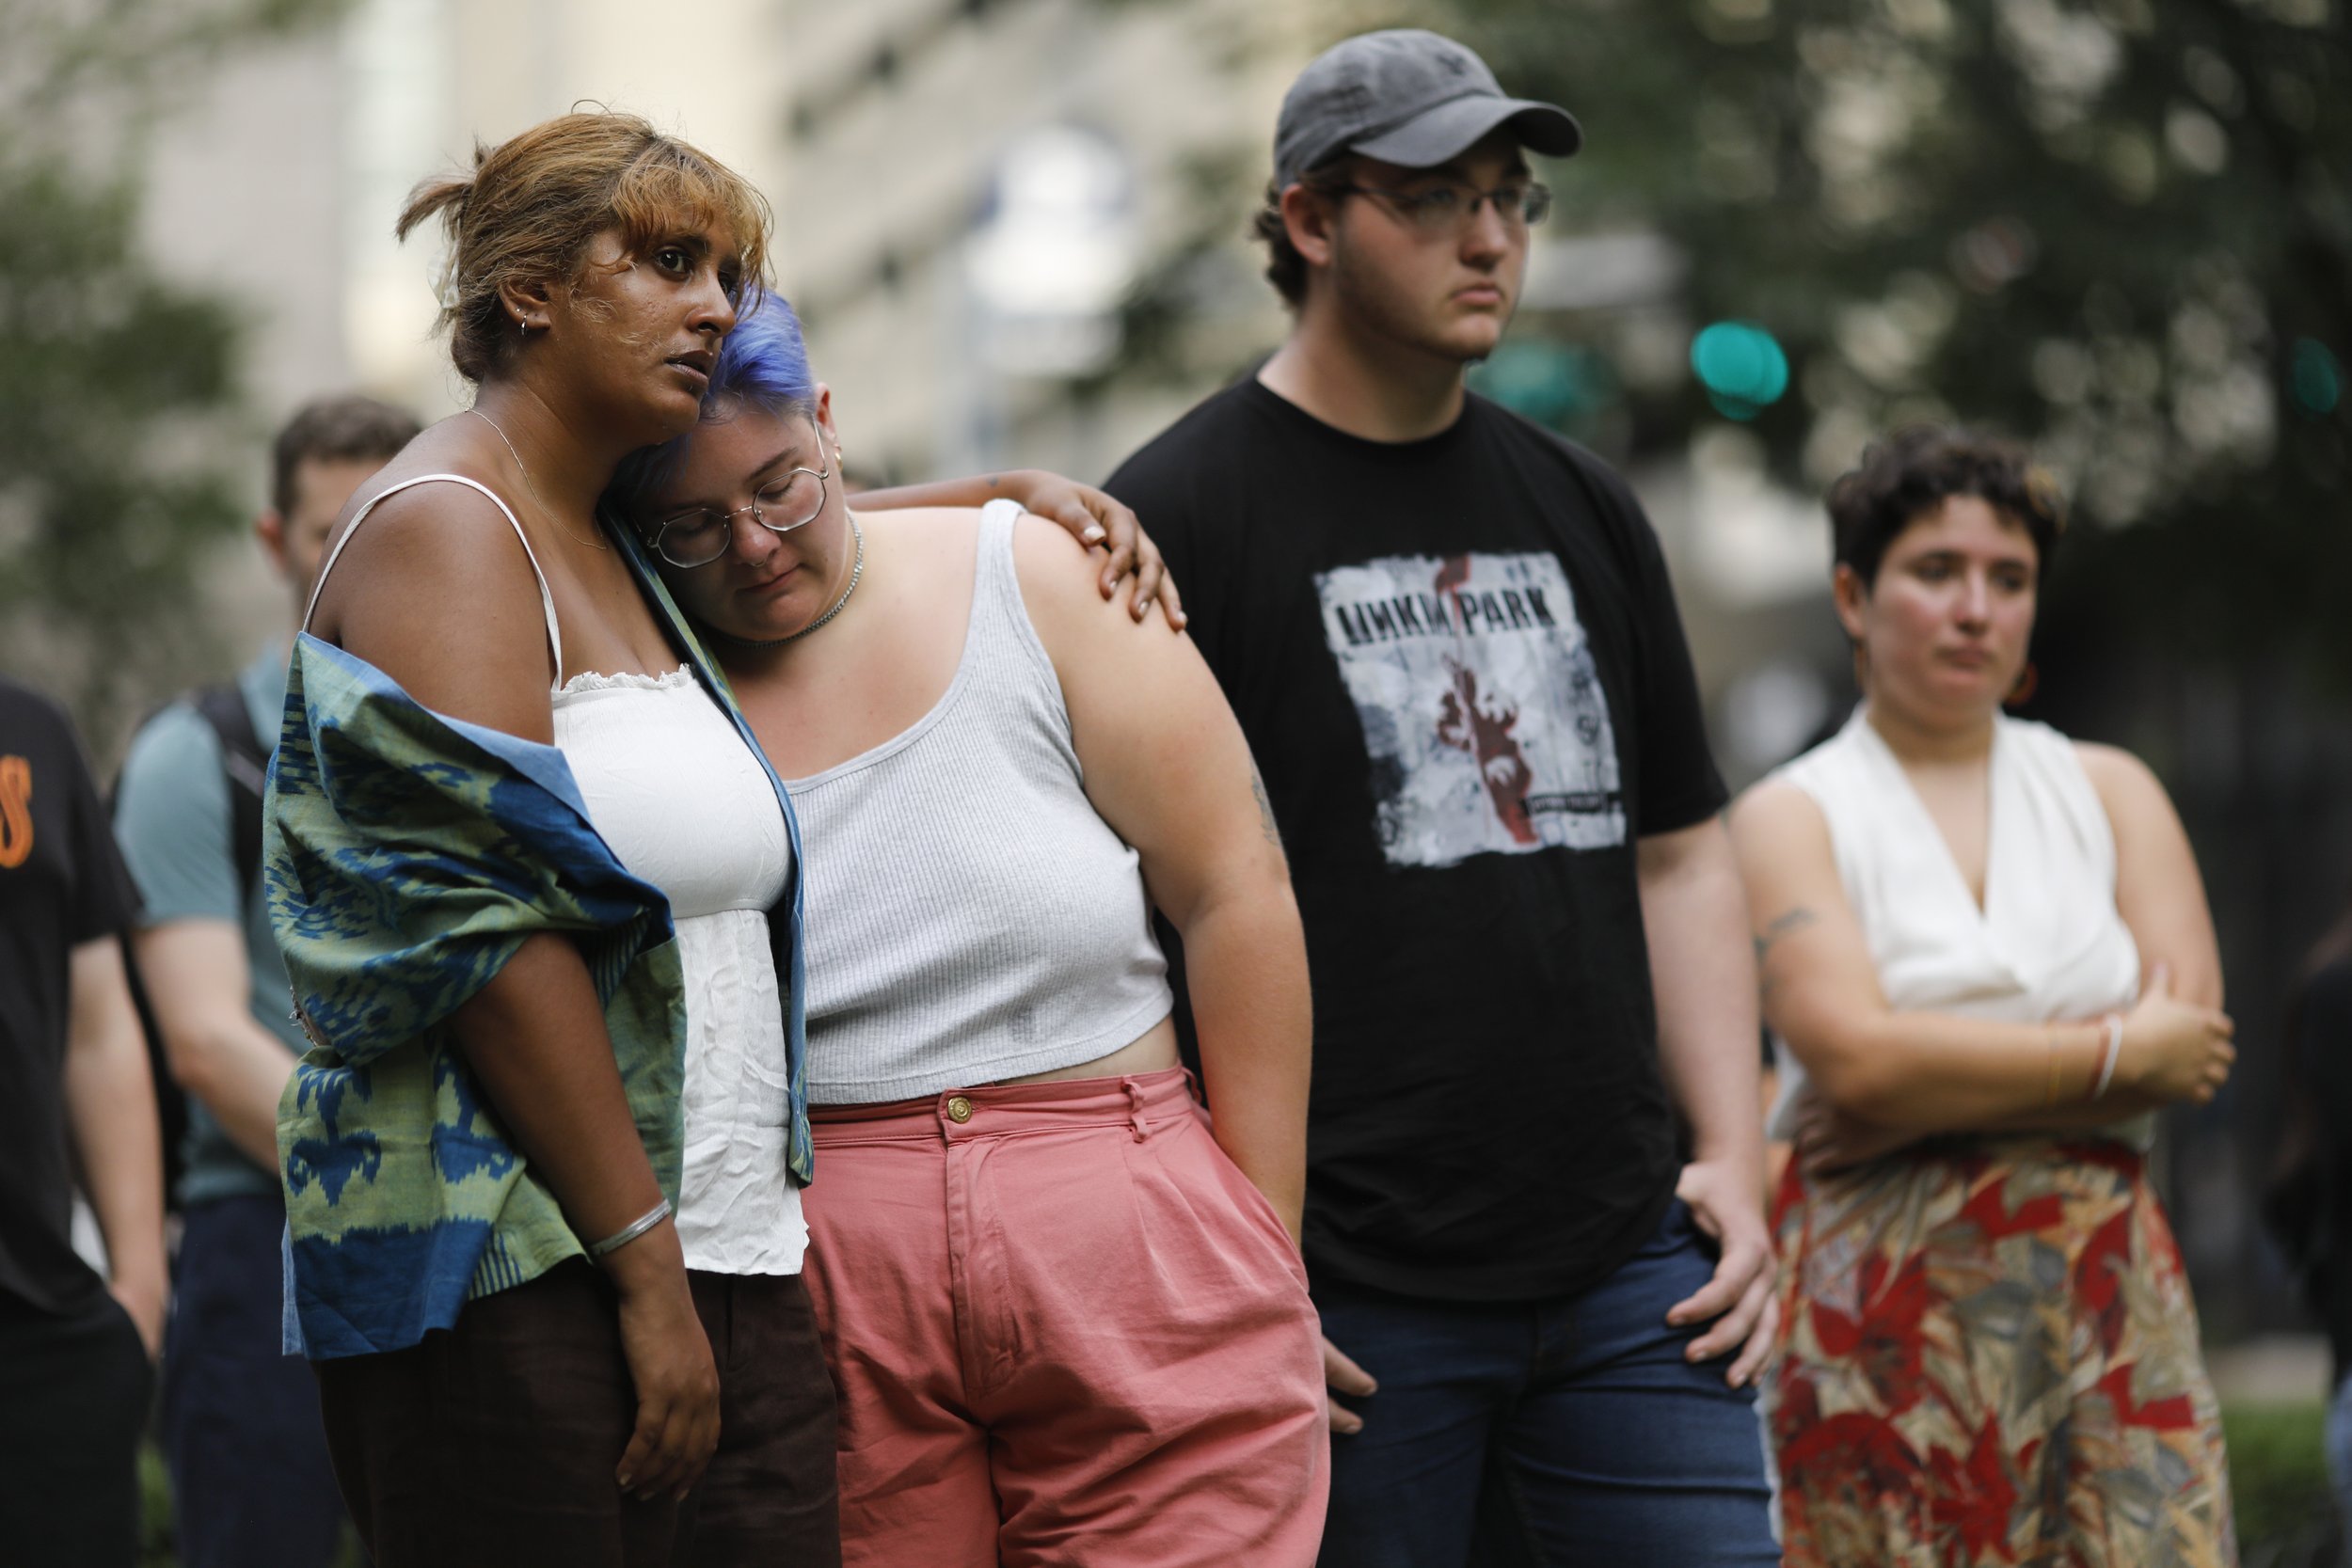  Bhargavi Garimella (left) embraces Allanah Rolph during a gathering to remember the life of Rodrigo Ventocilla and demand action from the Peruvian government at Statler Park in Boston on September 4, 2022. Ventocilla, a trans activist and Peruvian n